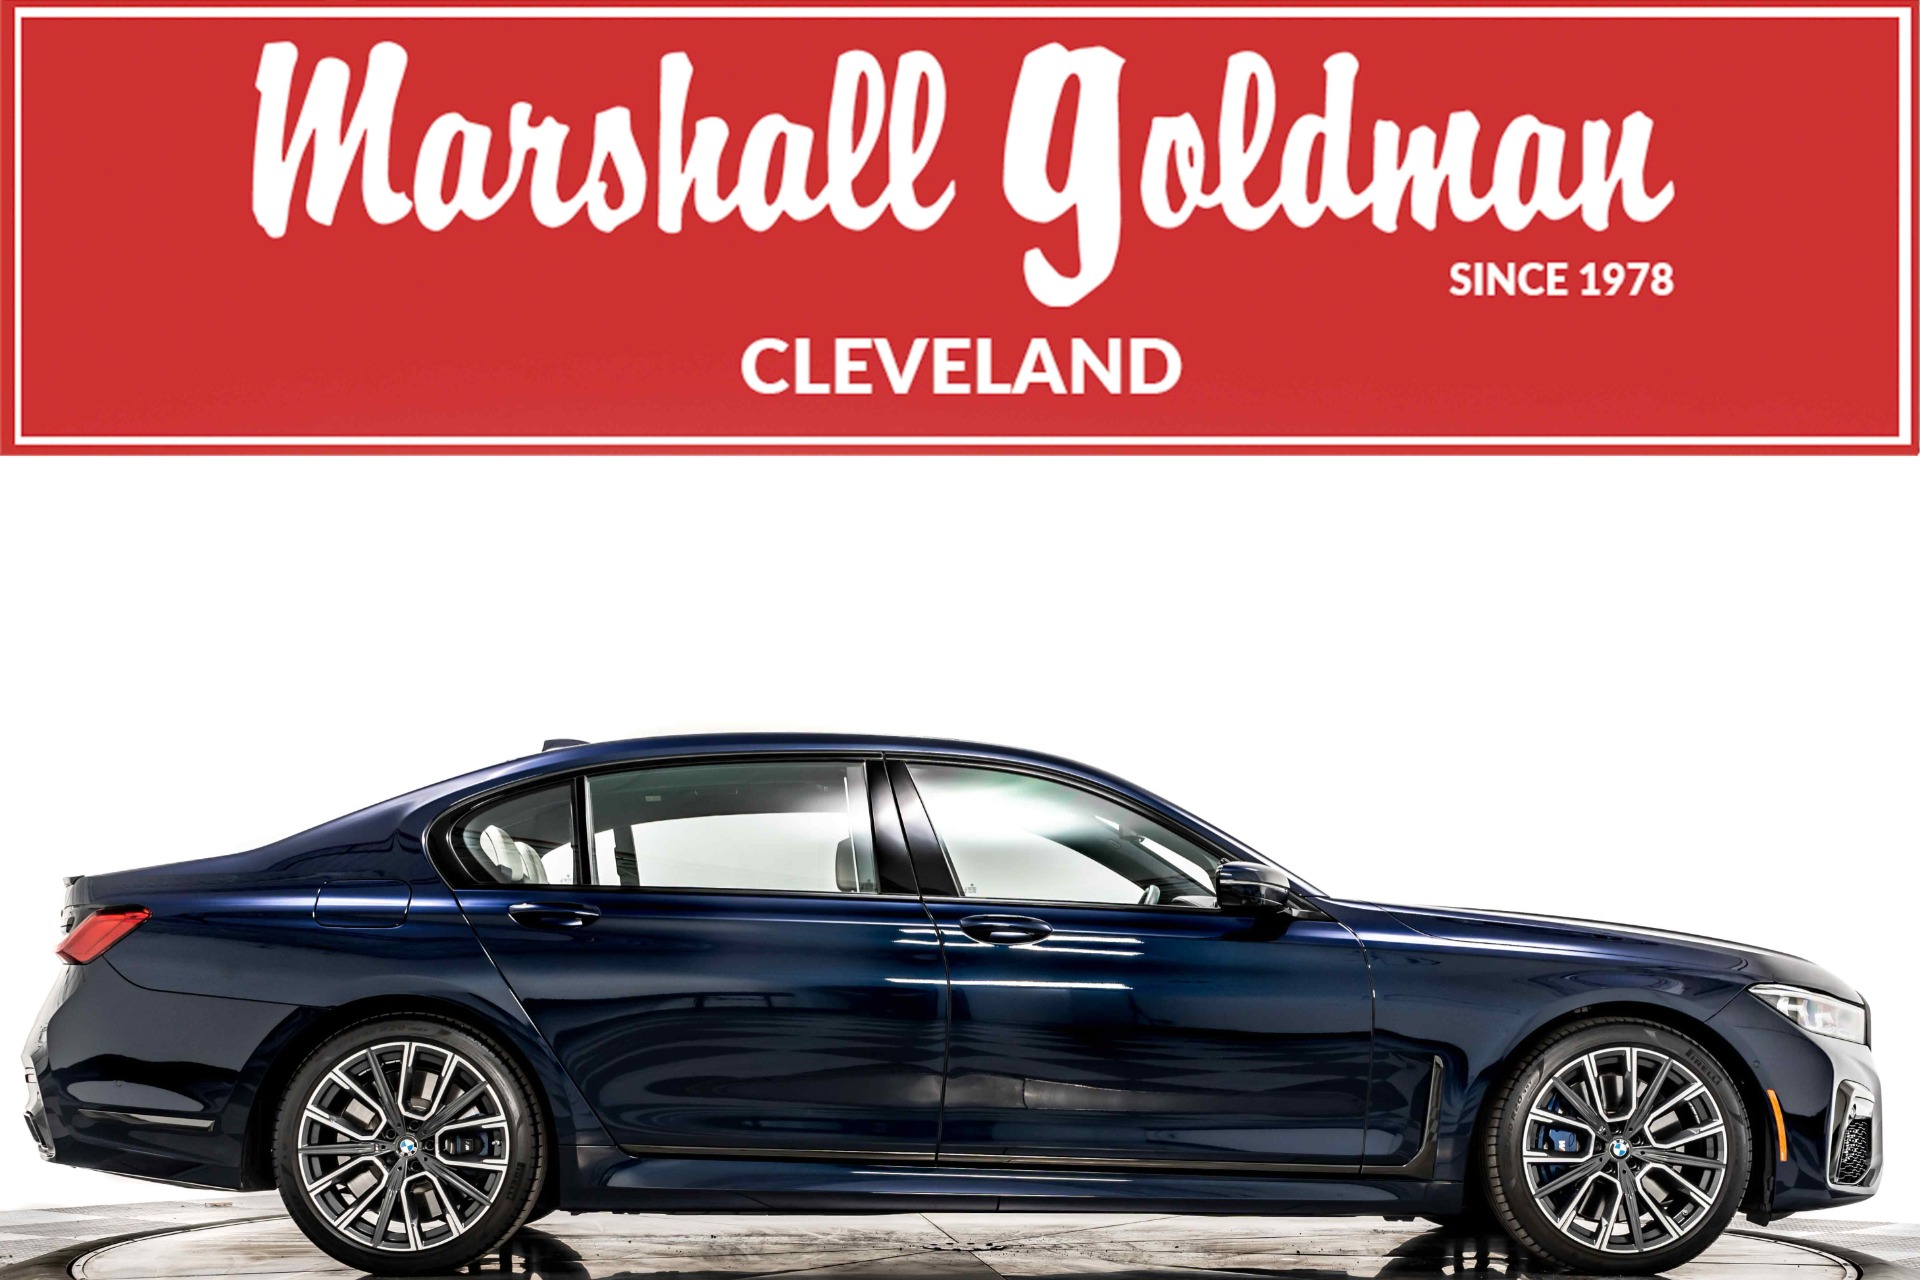 Used 2022 BMW M760i xDrive For Sale (Sold)  Marshall Goldman Cleveland  Stock #W760IBLCR